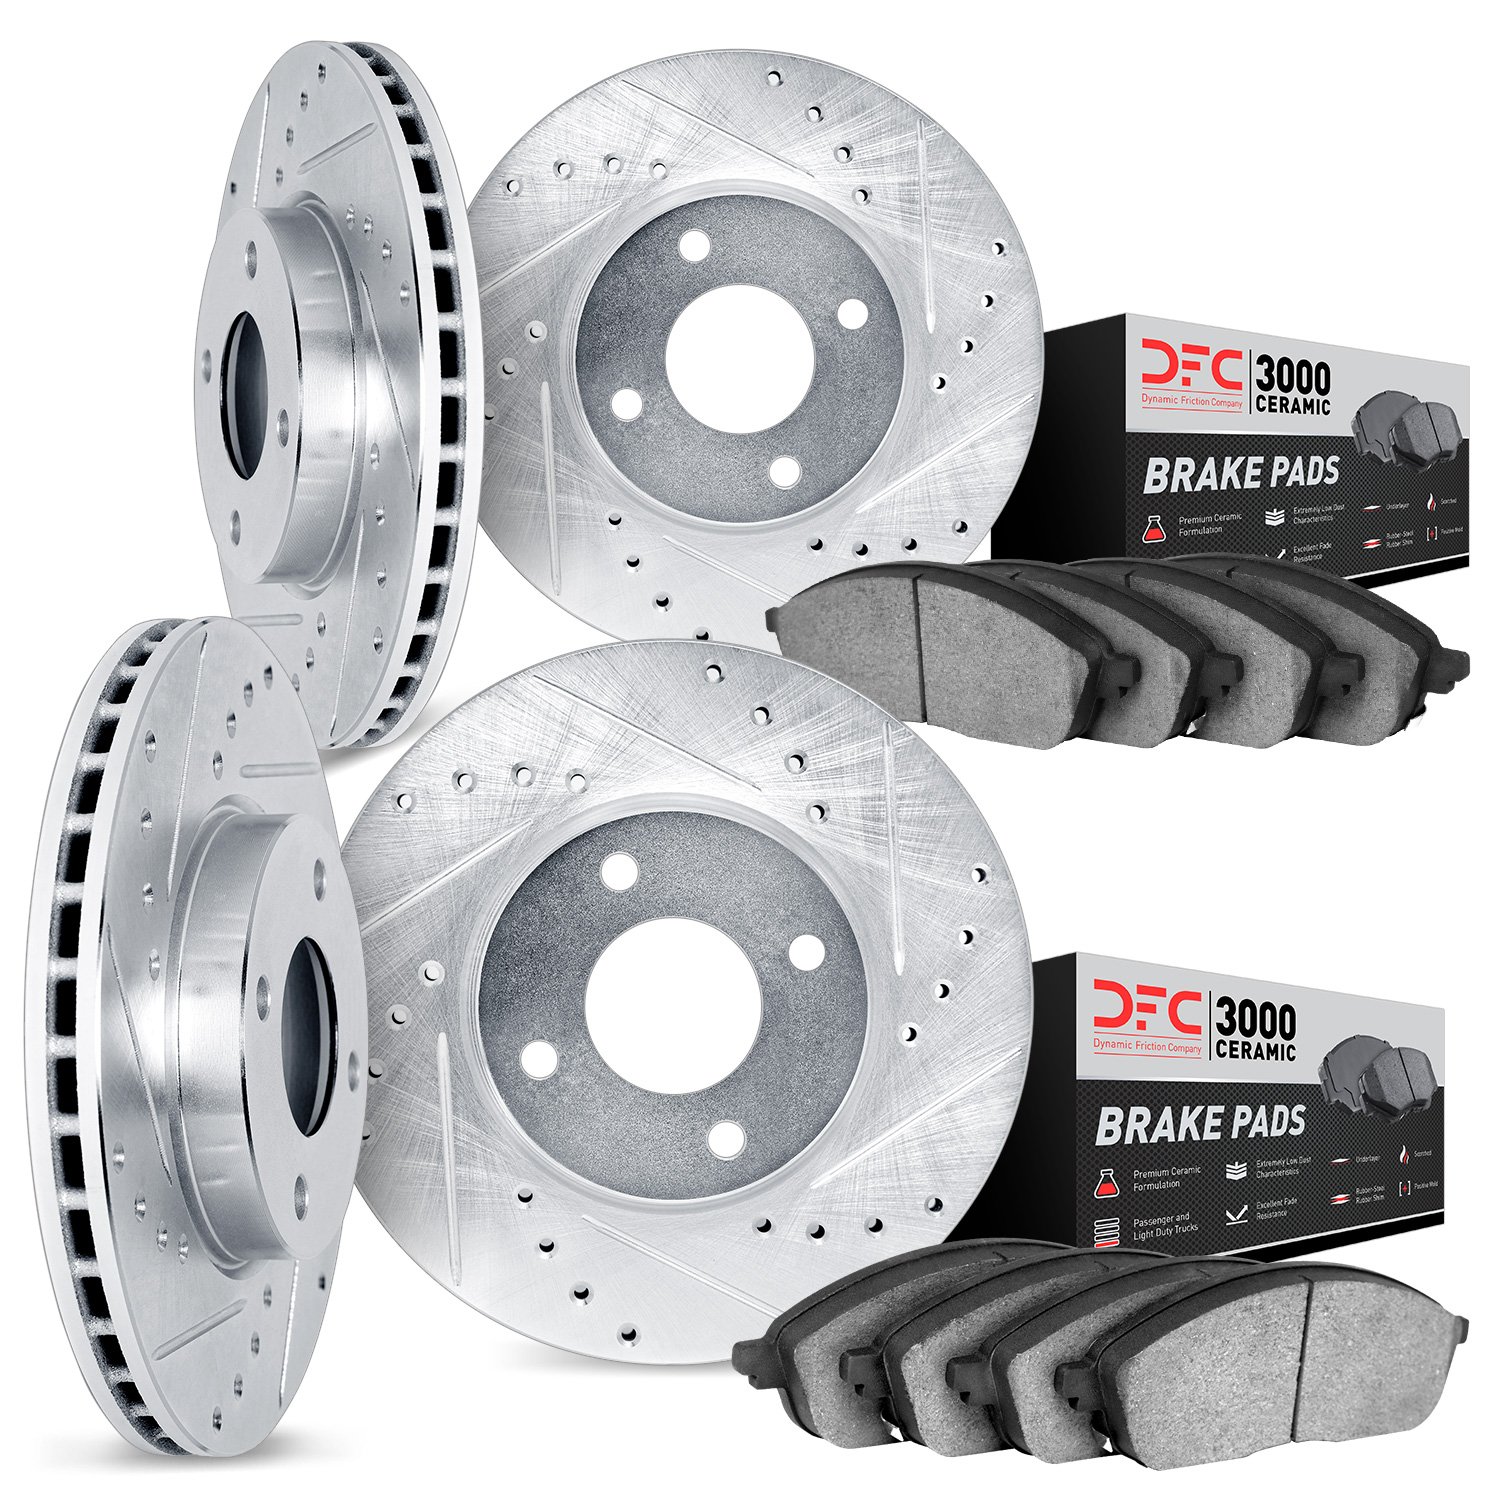 7304-56011 Drilled/Slotted Brake Rotor with 3000-Series Ceramic Brake Pads Kit [Silver], 1998-2000 Ford/Lincoln/Mercury/Mazda, P